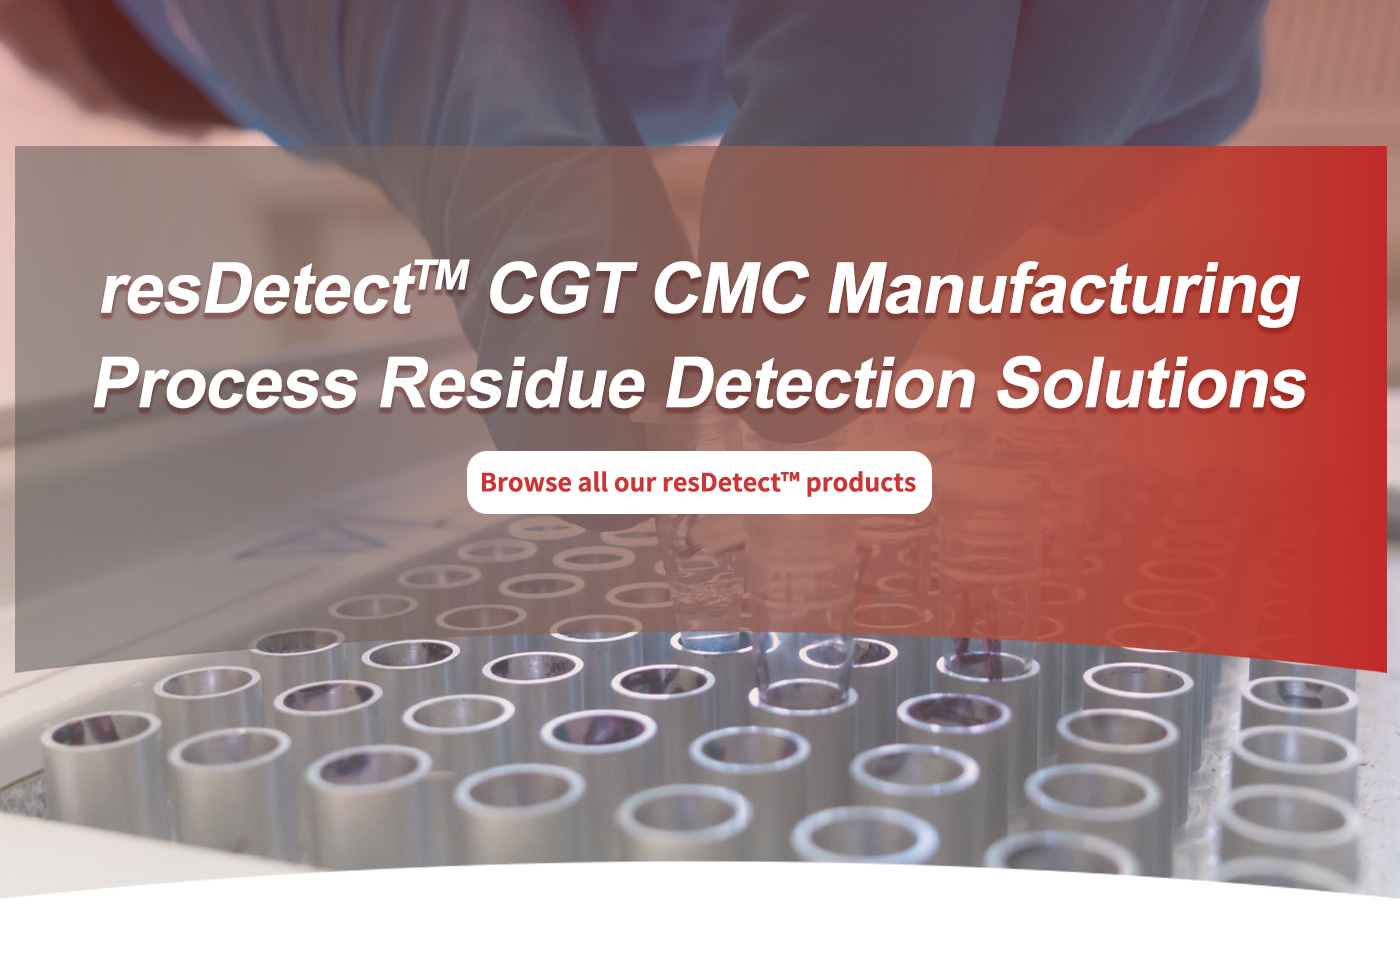 resDetect CGT CMC Manufacturing Process Residue